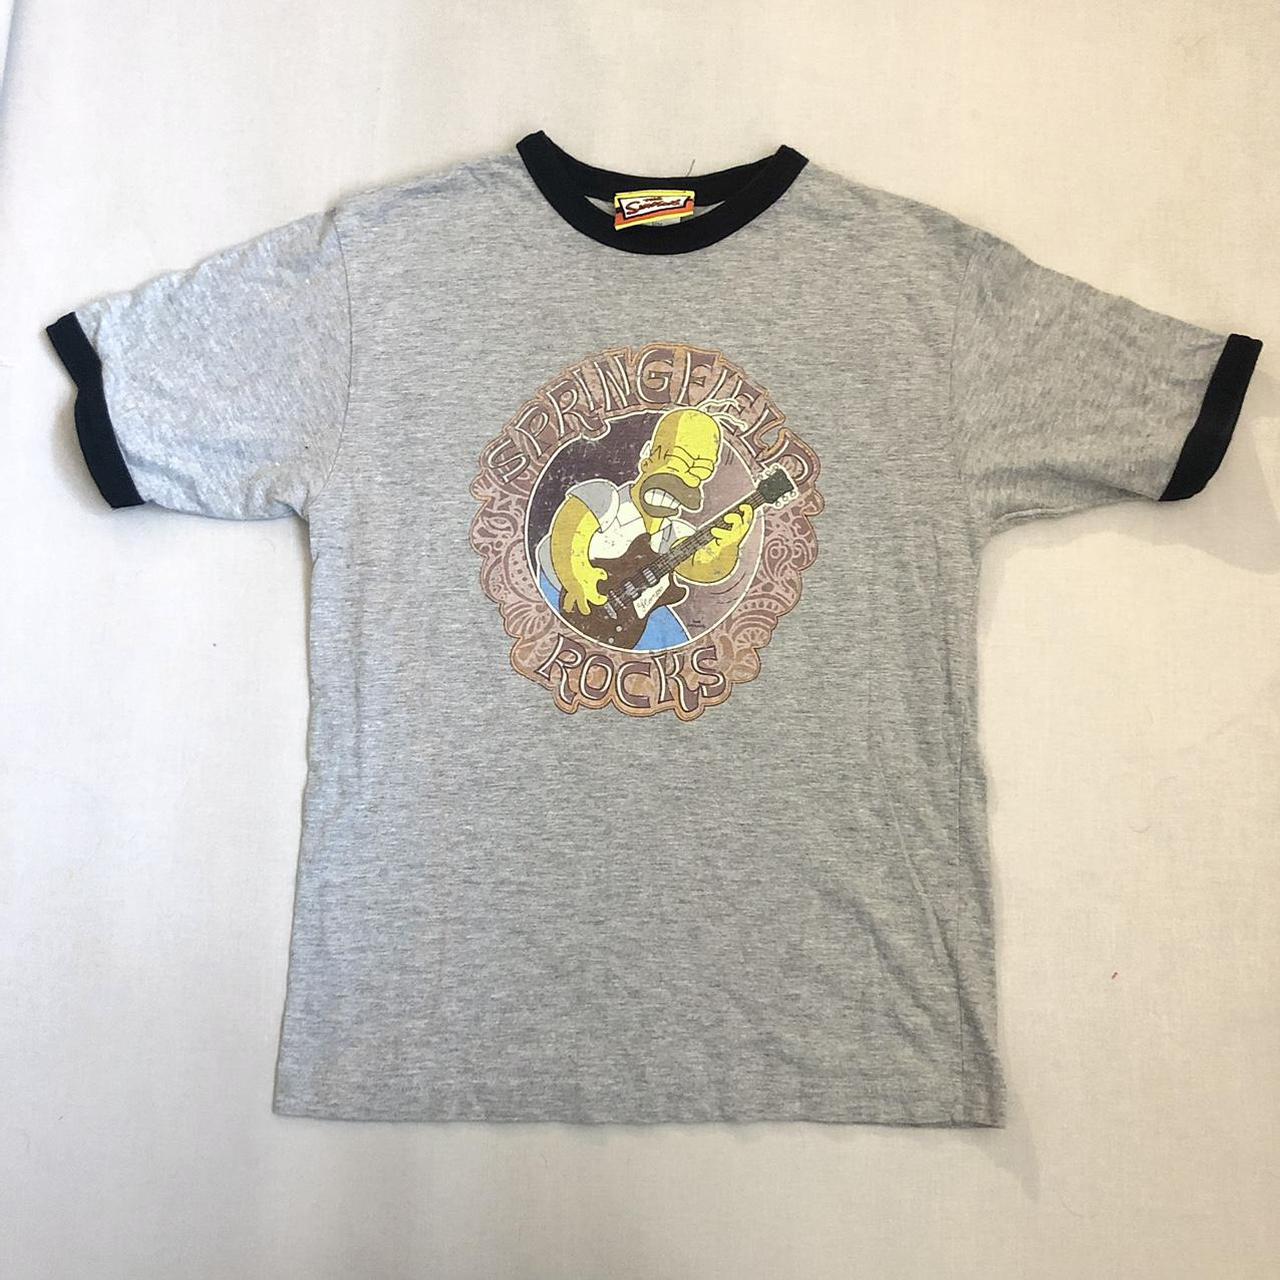 Product Image 1 - The Simpsons ringer Tshirt -